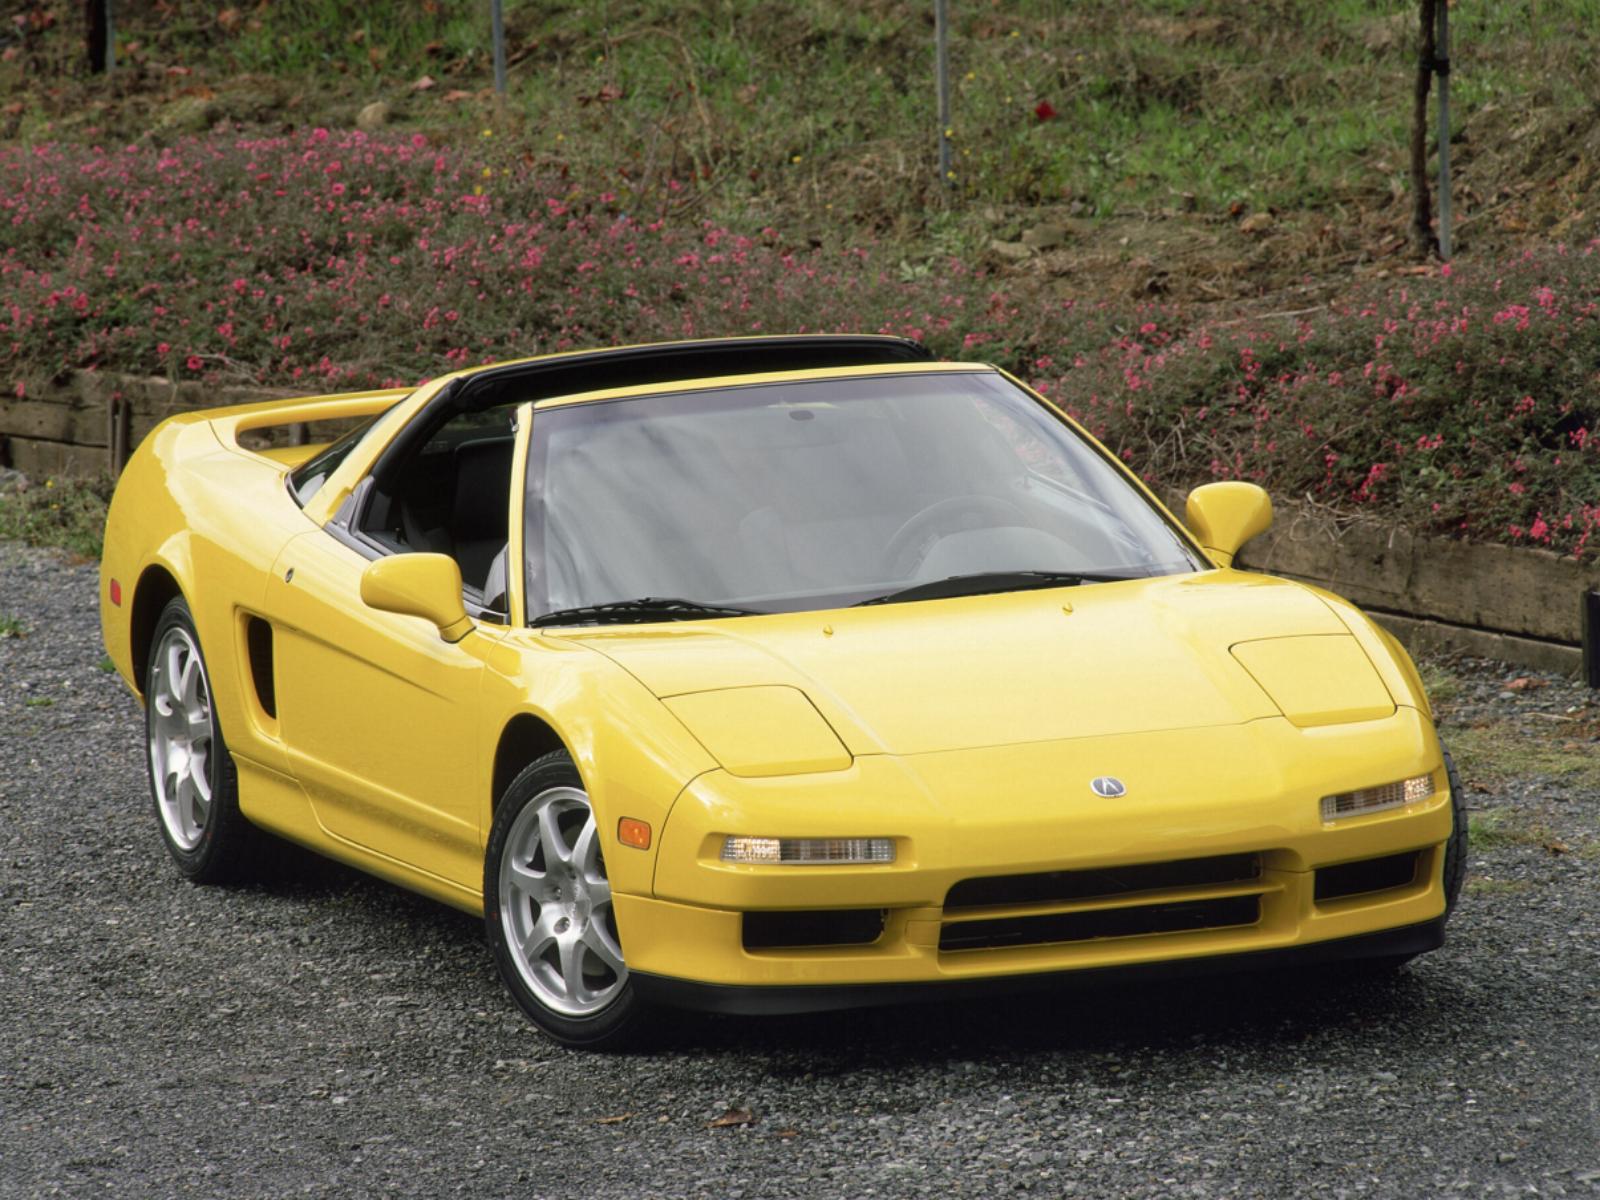 Acura NSX-T picture # 17562 | Acura photo gallery | CarsBase.